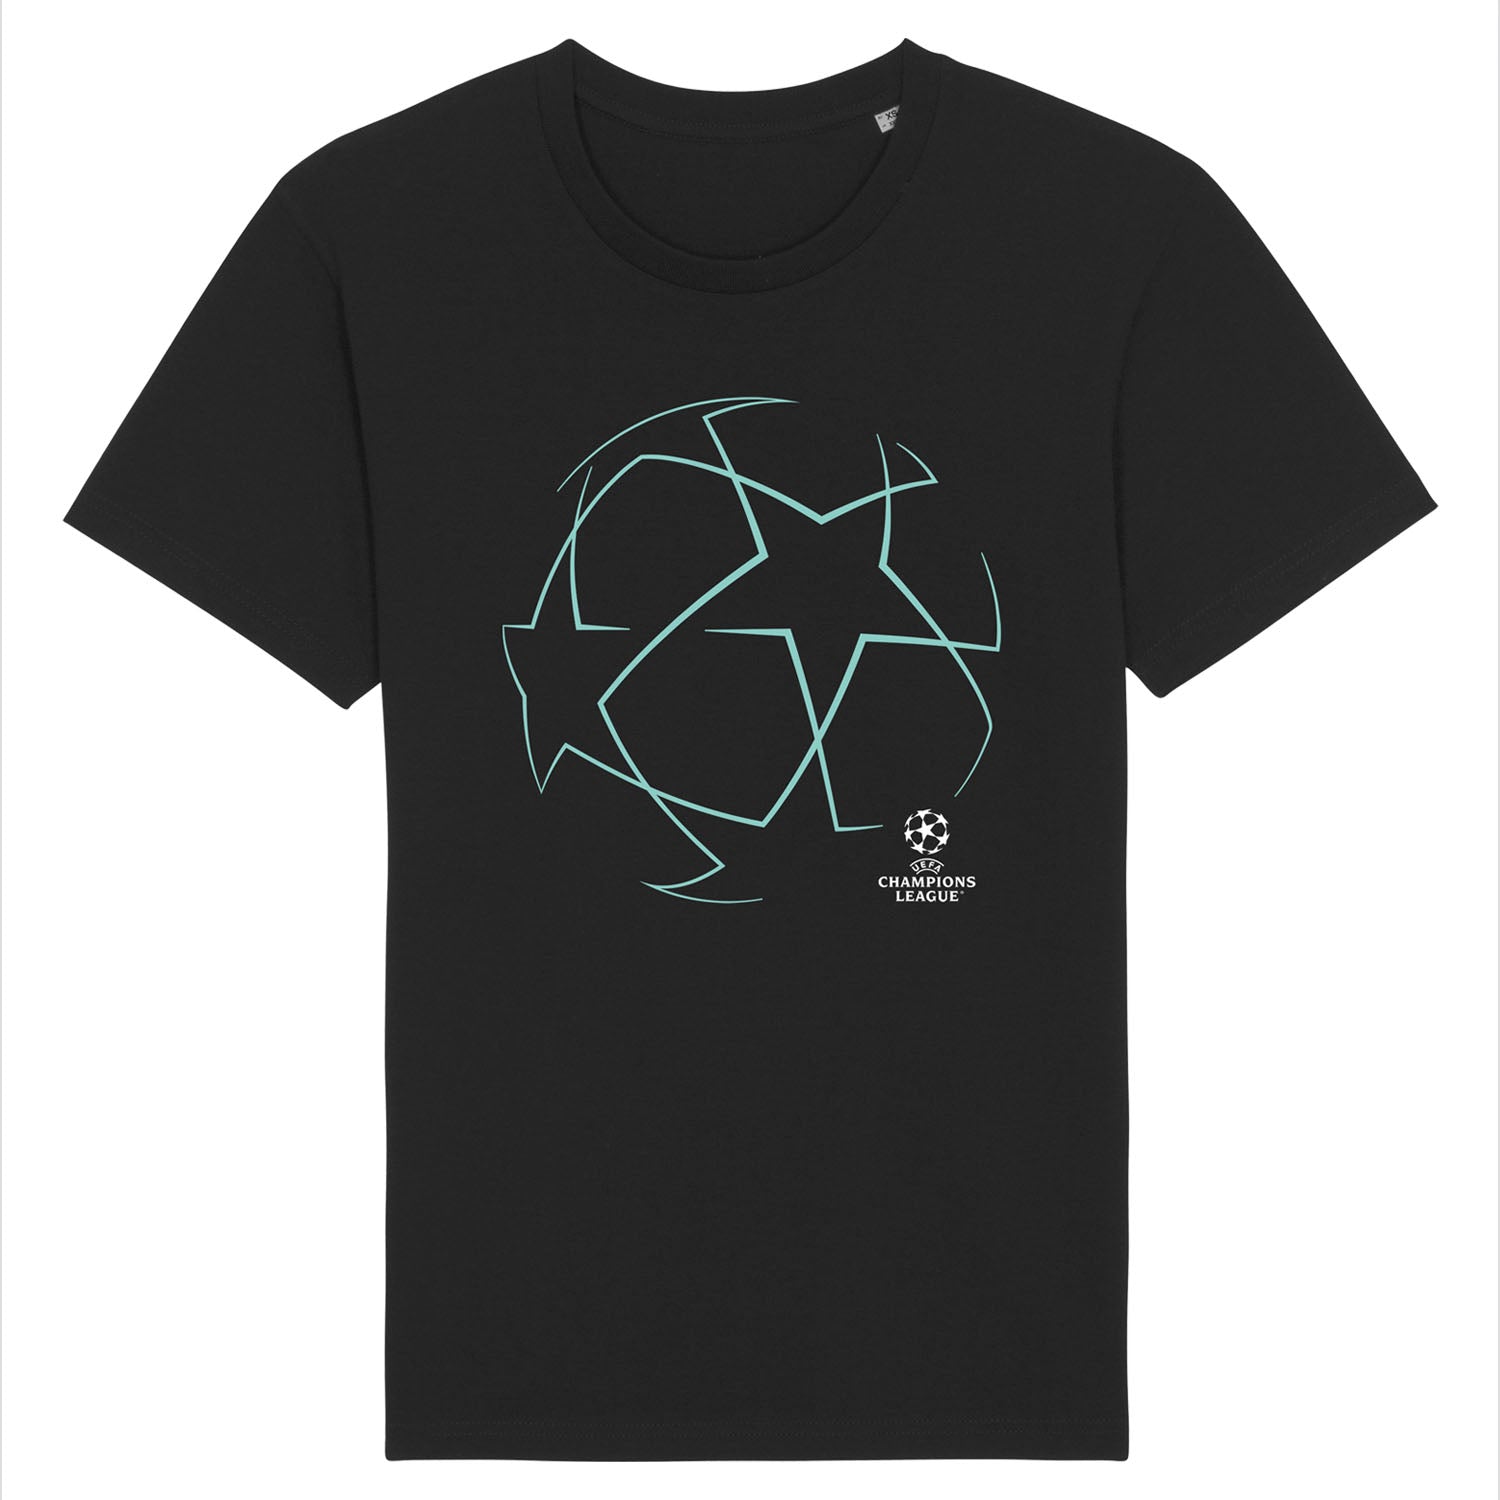 UEFA Champions League - Starball Black T-Shirt UEFA Club Competitions Online Store